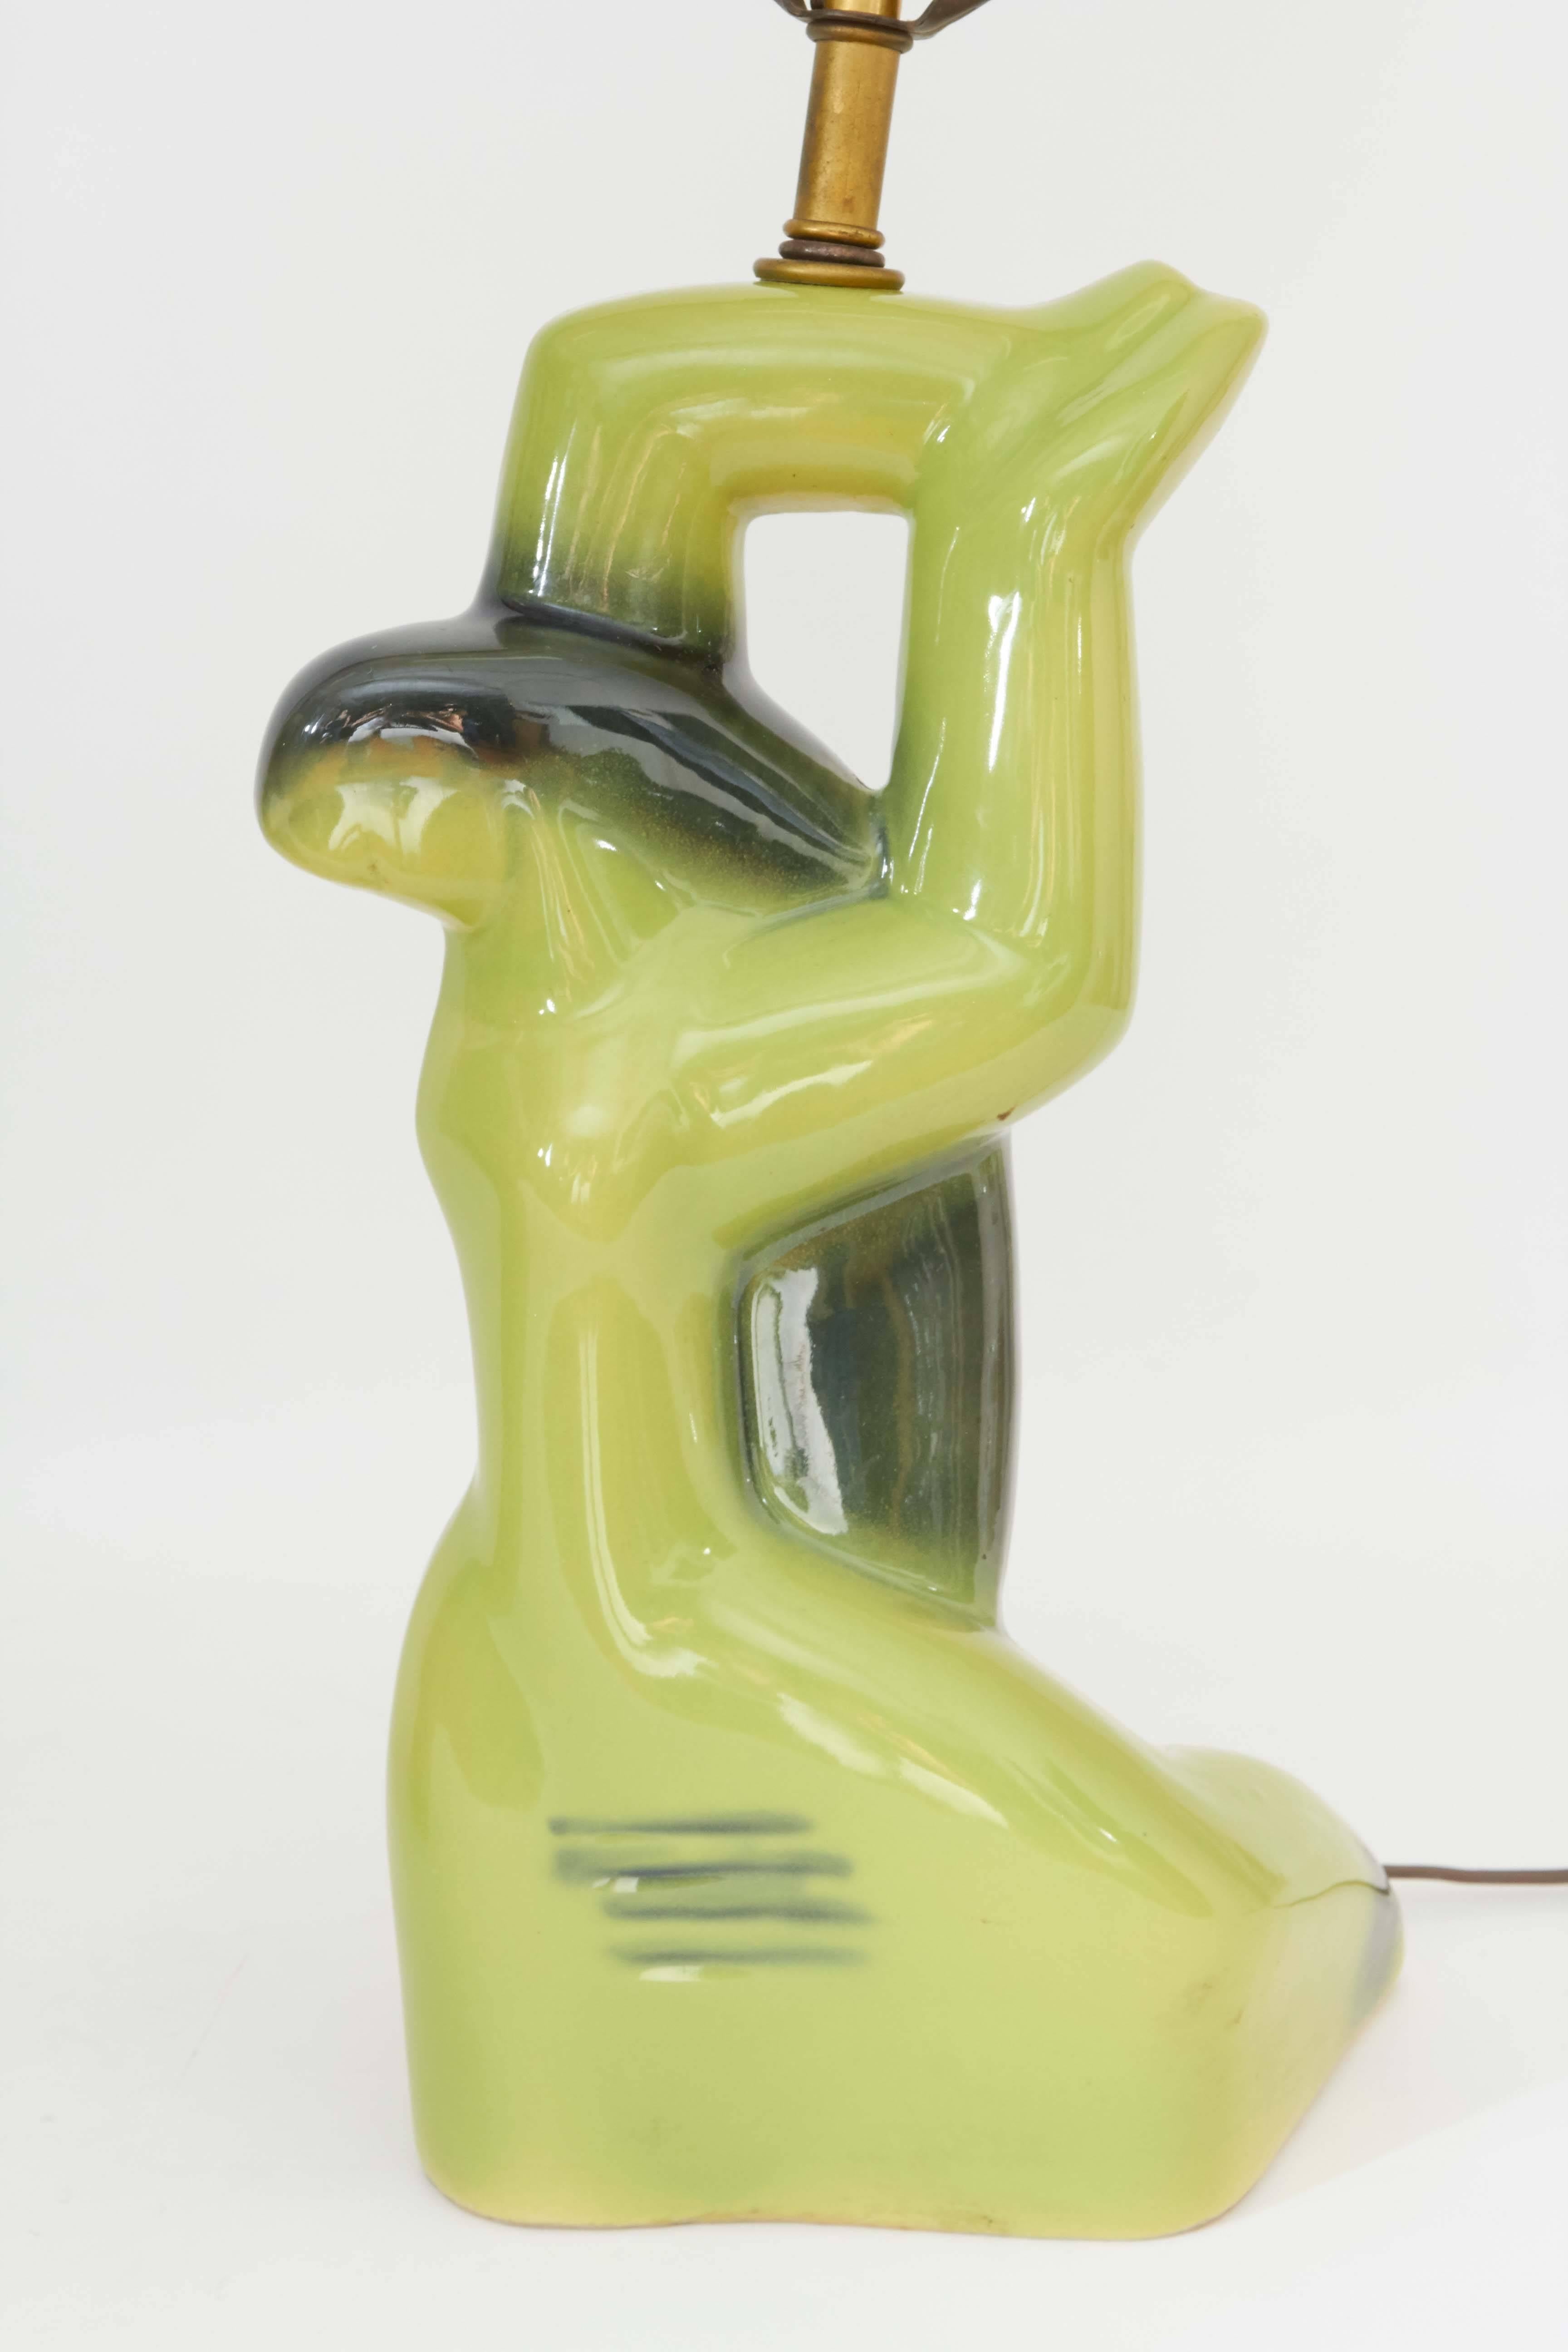 A pair of circa 1950s sculptural table lamps by Yasha Heifetz, depicting the abstracted figures of a man and woman in brilliant green glazed ceramic. Each with single socket, requiring Edison base bulbs. Markings include #2722 impressed to the